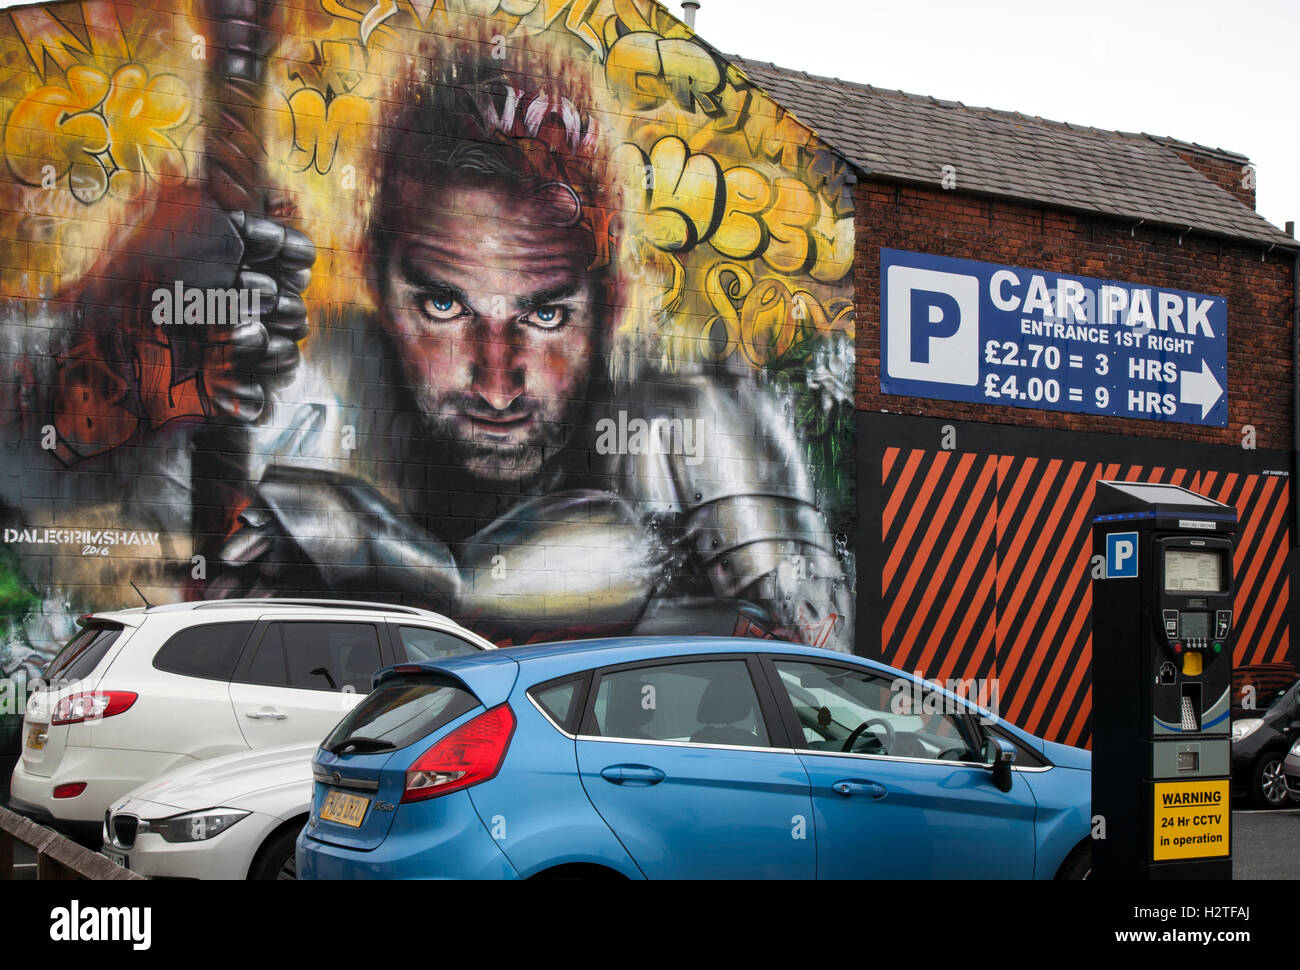 Glaring eyes watching over Car park; Parking Eye Fines & Regulations and Art Graffiti on Cookson Street Car park walls part of the Re-style Blackpool Project,  Lancashire, UK, 2016 Stock Photo